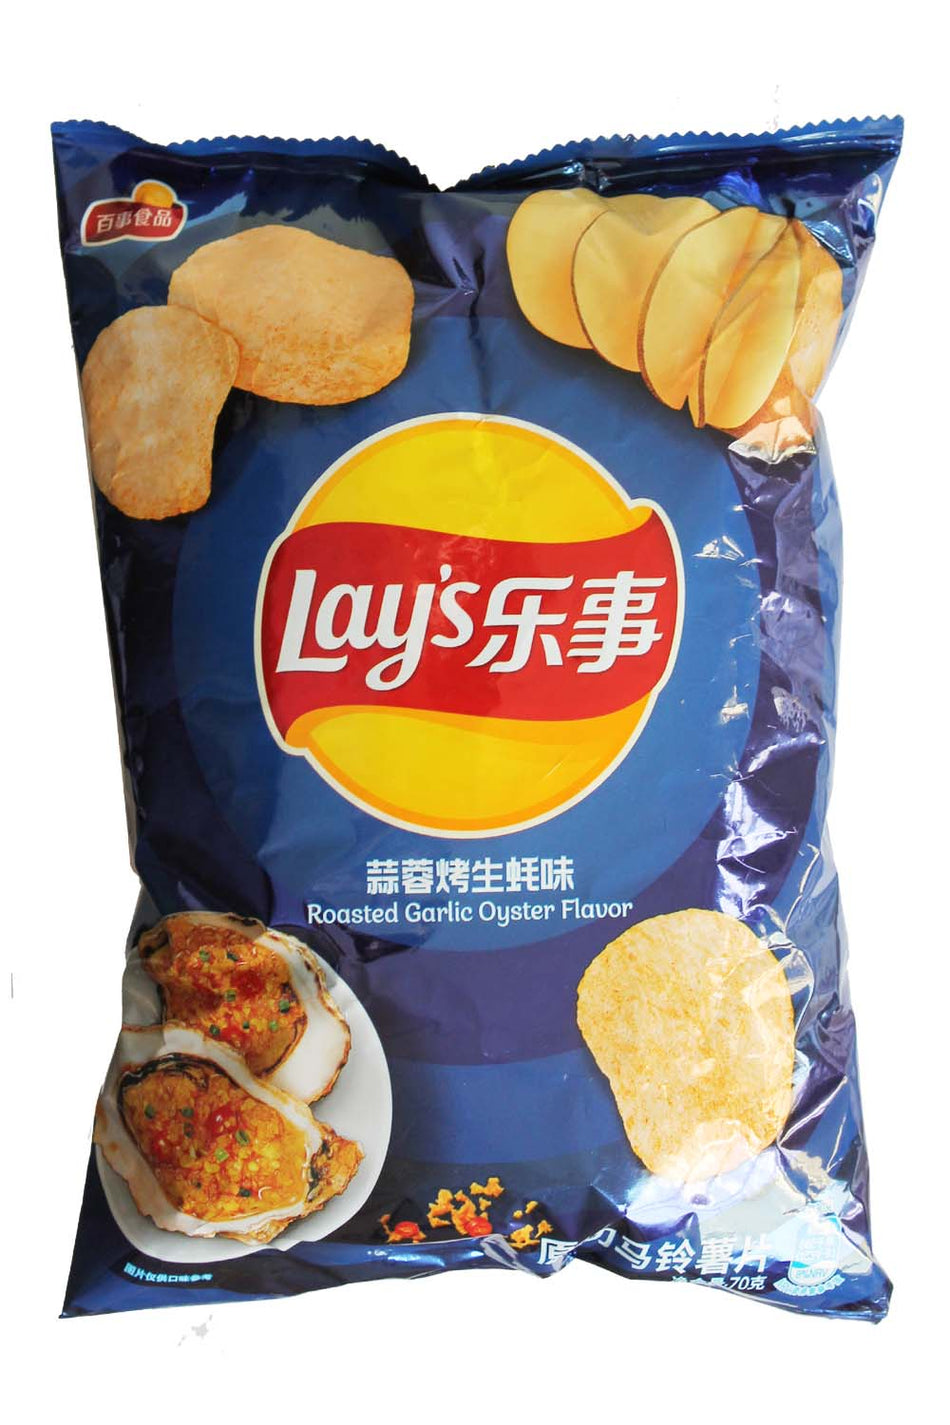 Lay's  Roasted Garlic Oyster flavor chip